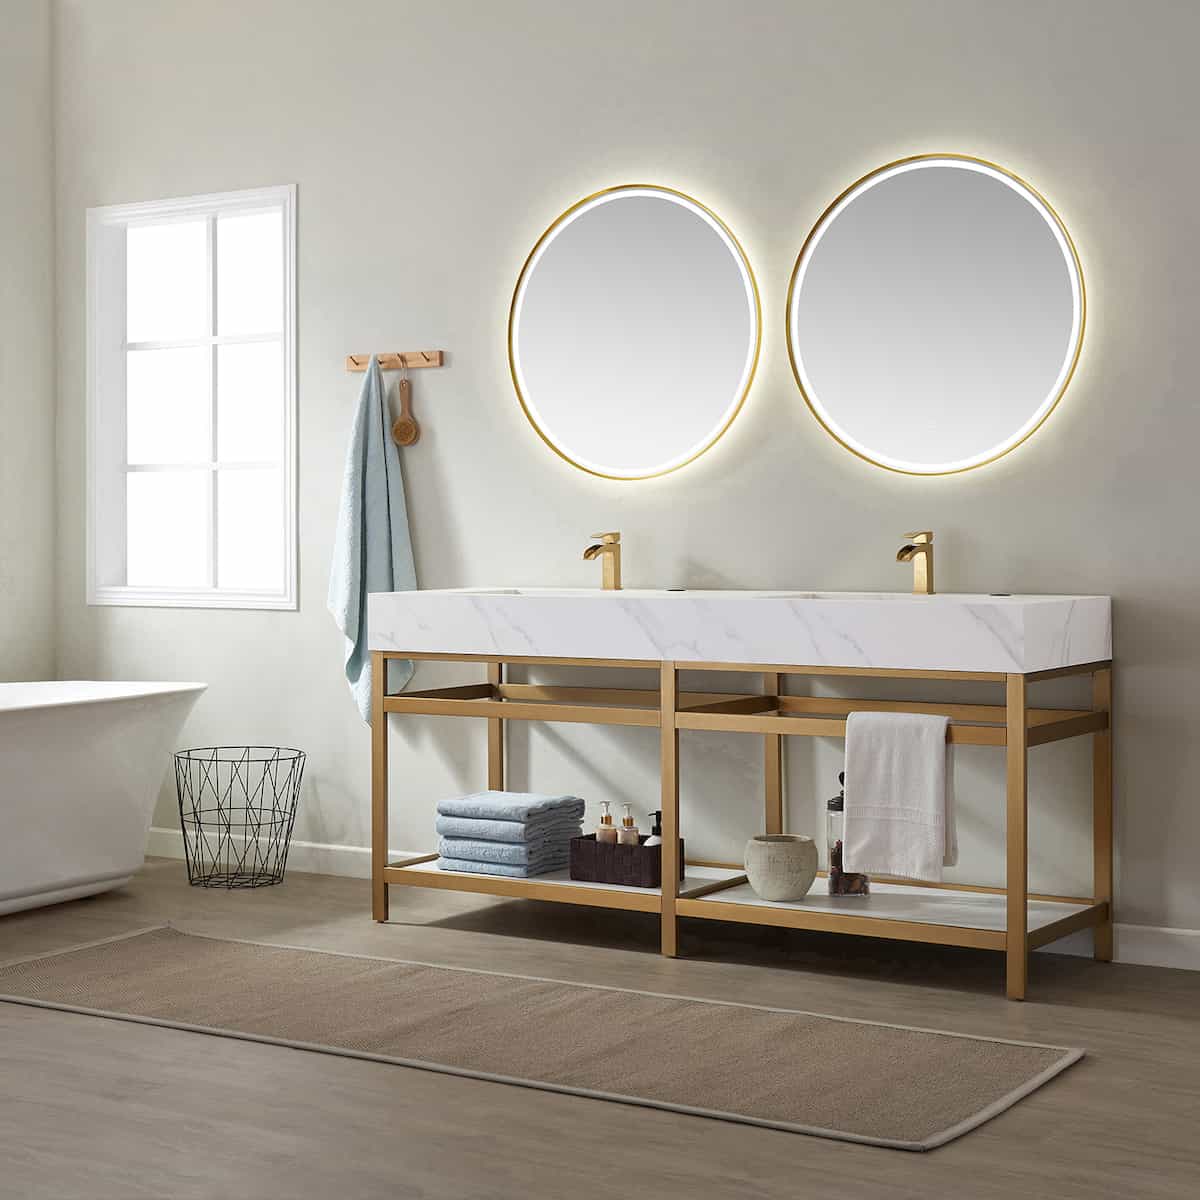 Vinnova Bilbao 72 Inch Freestanding Double Vanity with Brushed-Gold Stainless Steel Bracket Match with Snow Mountain-White Stone Countertop With LED Mirrors Side 701172-BG-SMB